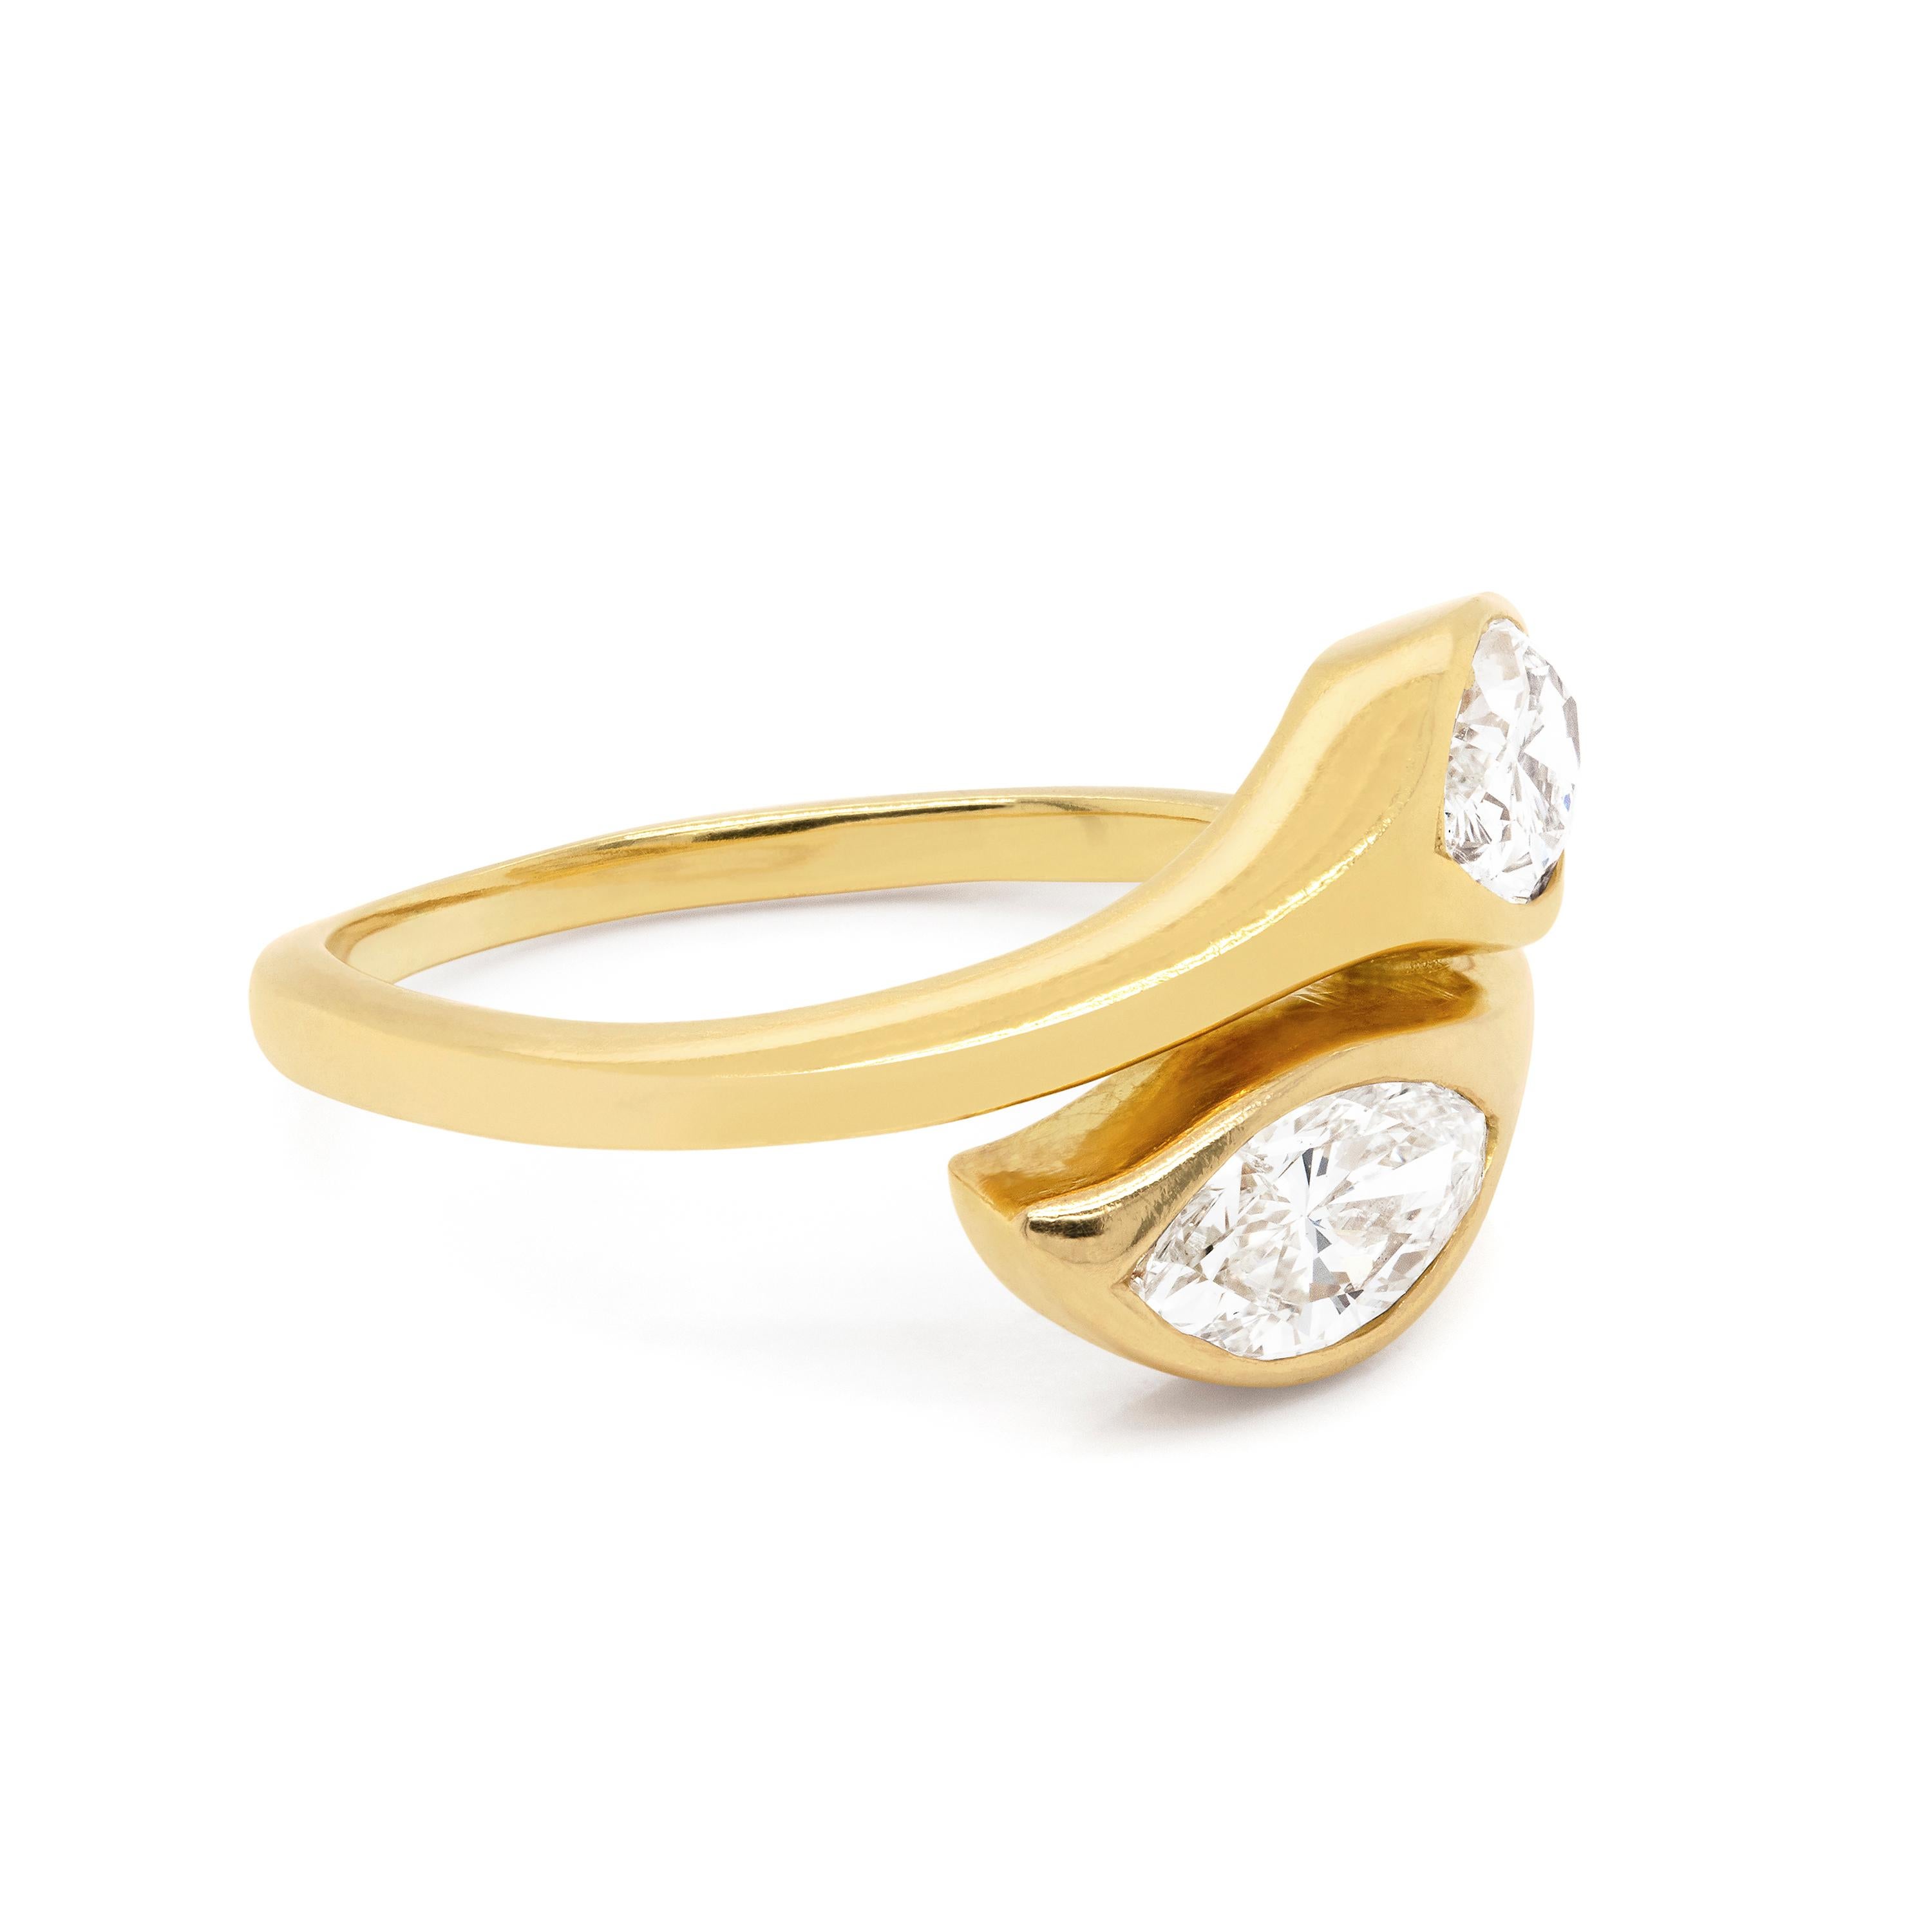 Beautifully delicate two stone twist ring featuring two marquise shaped diamonds in rubover open back settings with an approximate combined weight of 1.10 carat. This lovely ring is made in 18ct yellow gold and tapers to a fine 1.7mm at the back.